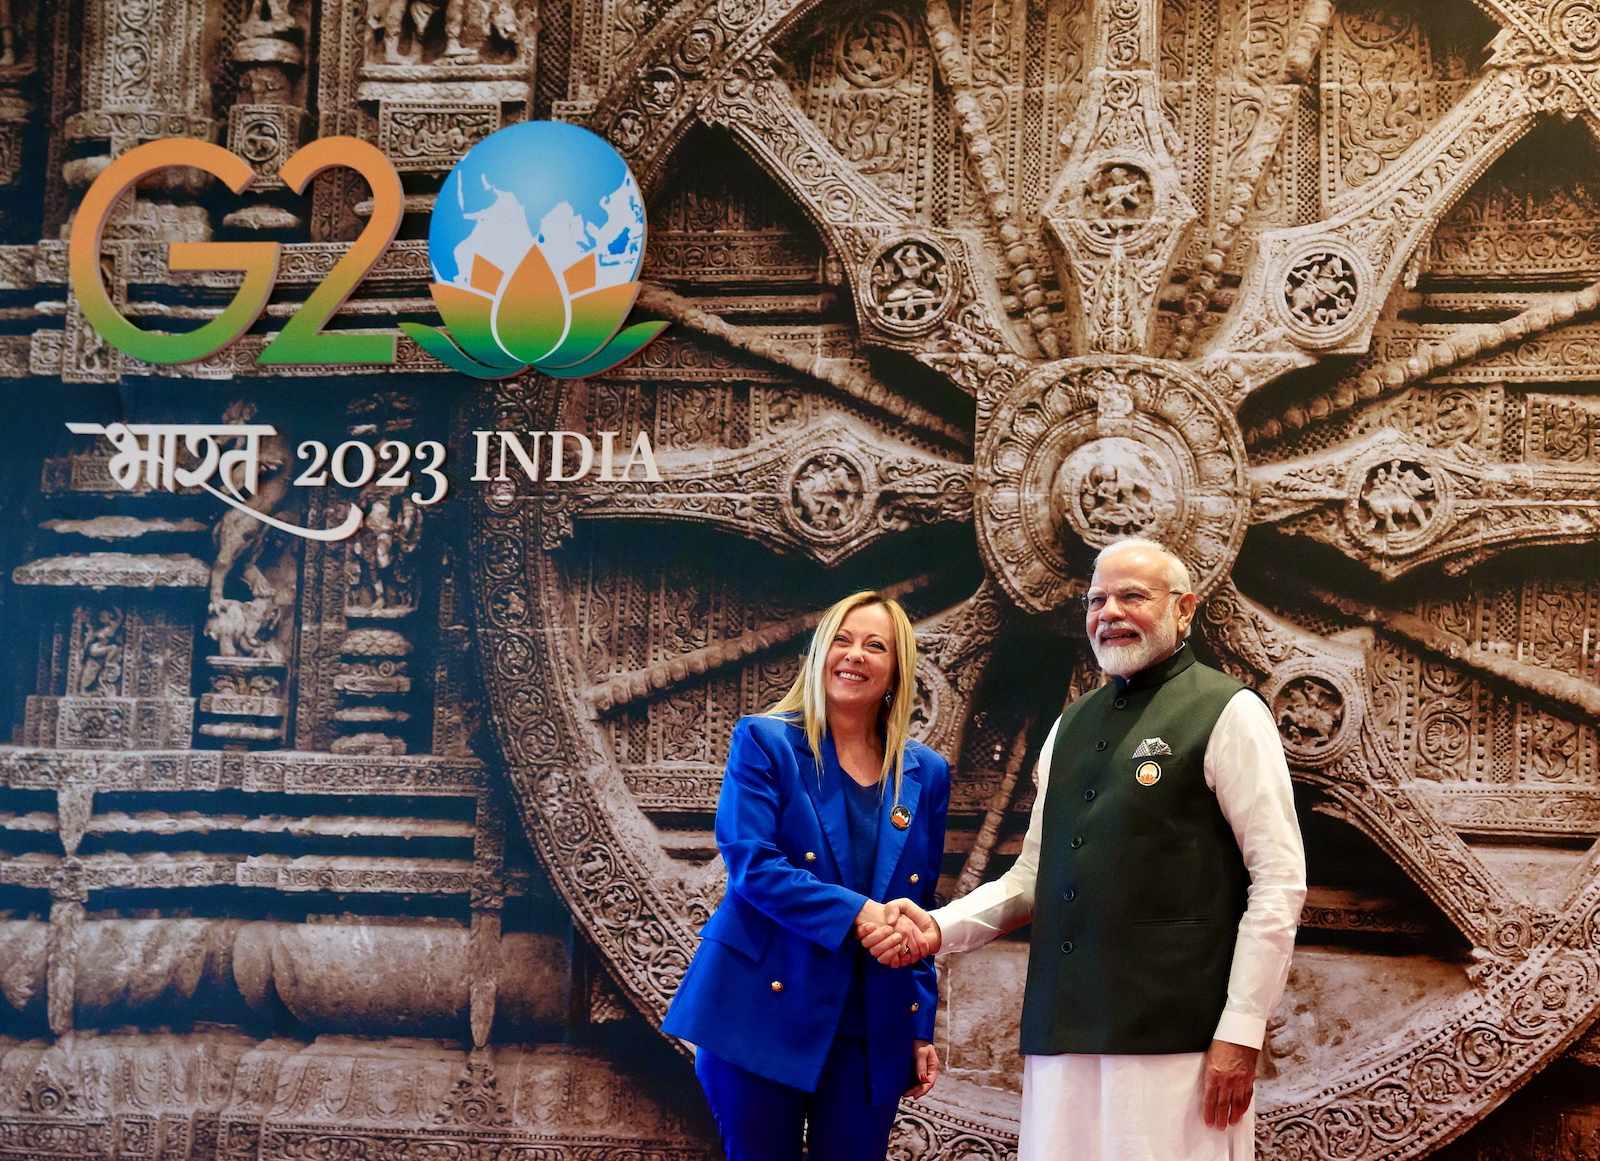 epa10849960 A handout picture made available by the Chigi Palace (Palazzo Chigi) Press Office shows the Prime Minister of Italy, Giorgia Meloni, Giorgia Meloni (L) being welcomed by Indian Prime Minister Narendra Modi (R) as she arrives for the first session of the G20 Summit at the ITPO Convention Centre Pragati Maidan in New Delhi, India, 09 September 2023. The G20 Heads of State and Government summit takes place in the Indian capital on 09 and 10 September.  EPA/FILIPPO ATTILI / HANDOUT  HANDOUT EDITORIAL USE ONLY/NO SALES